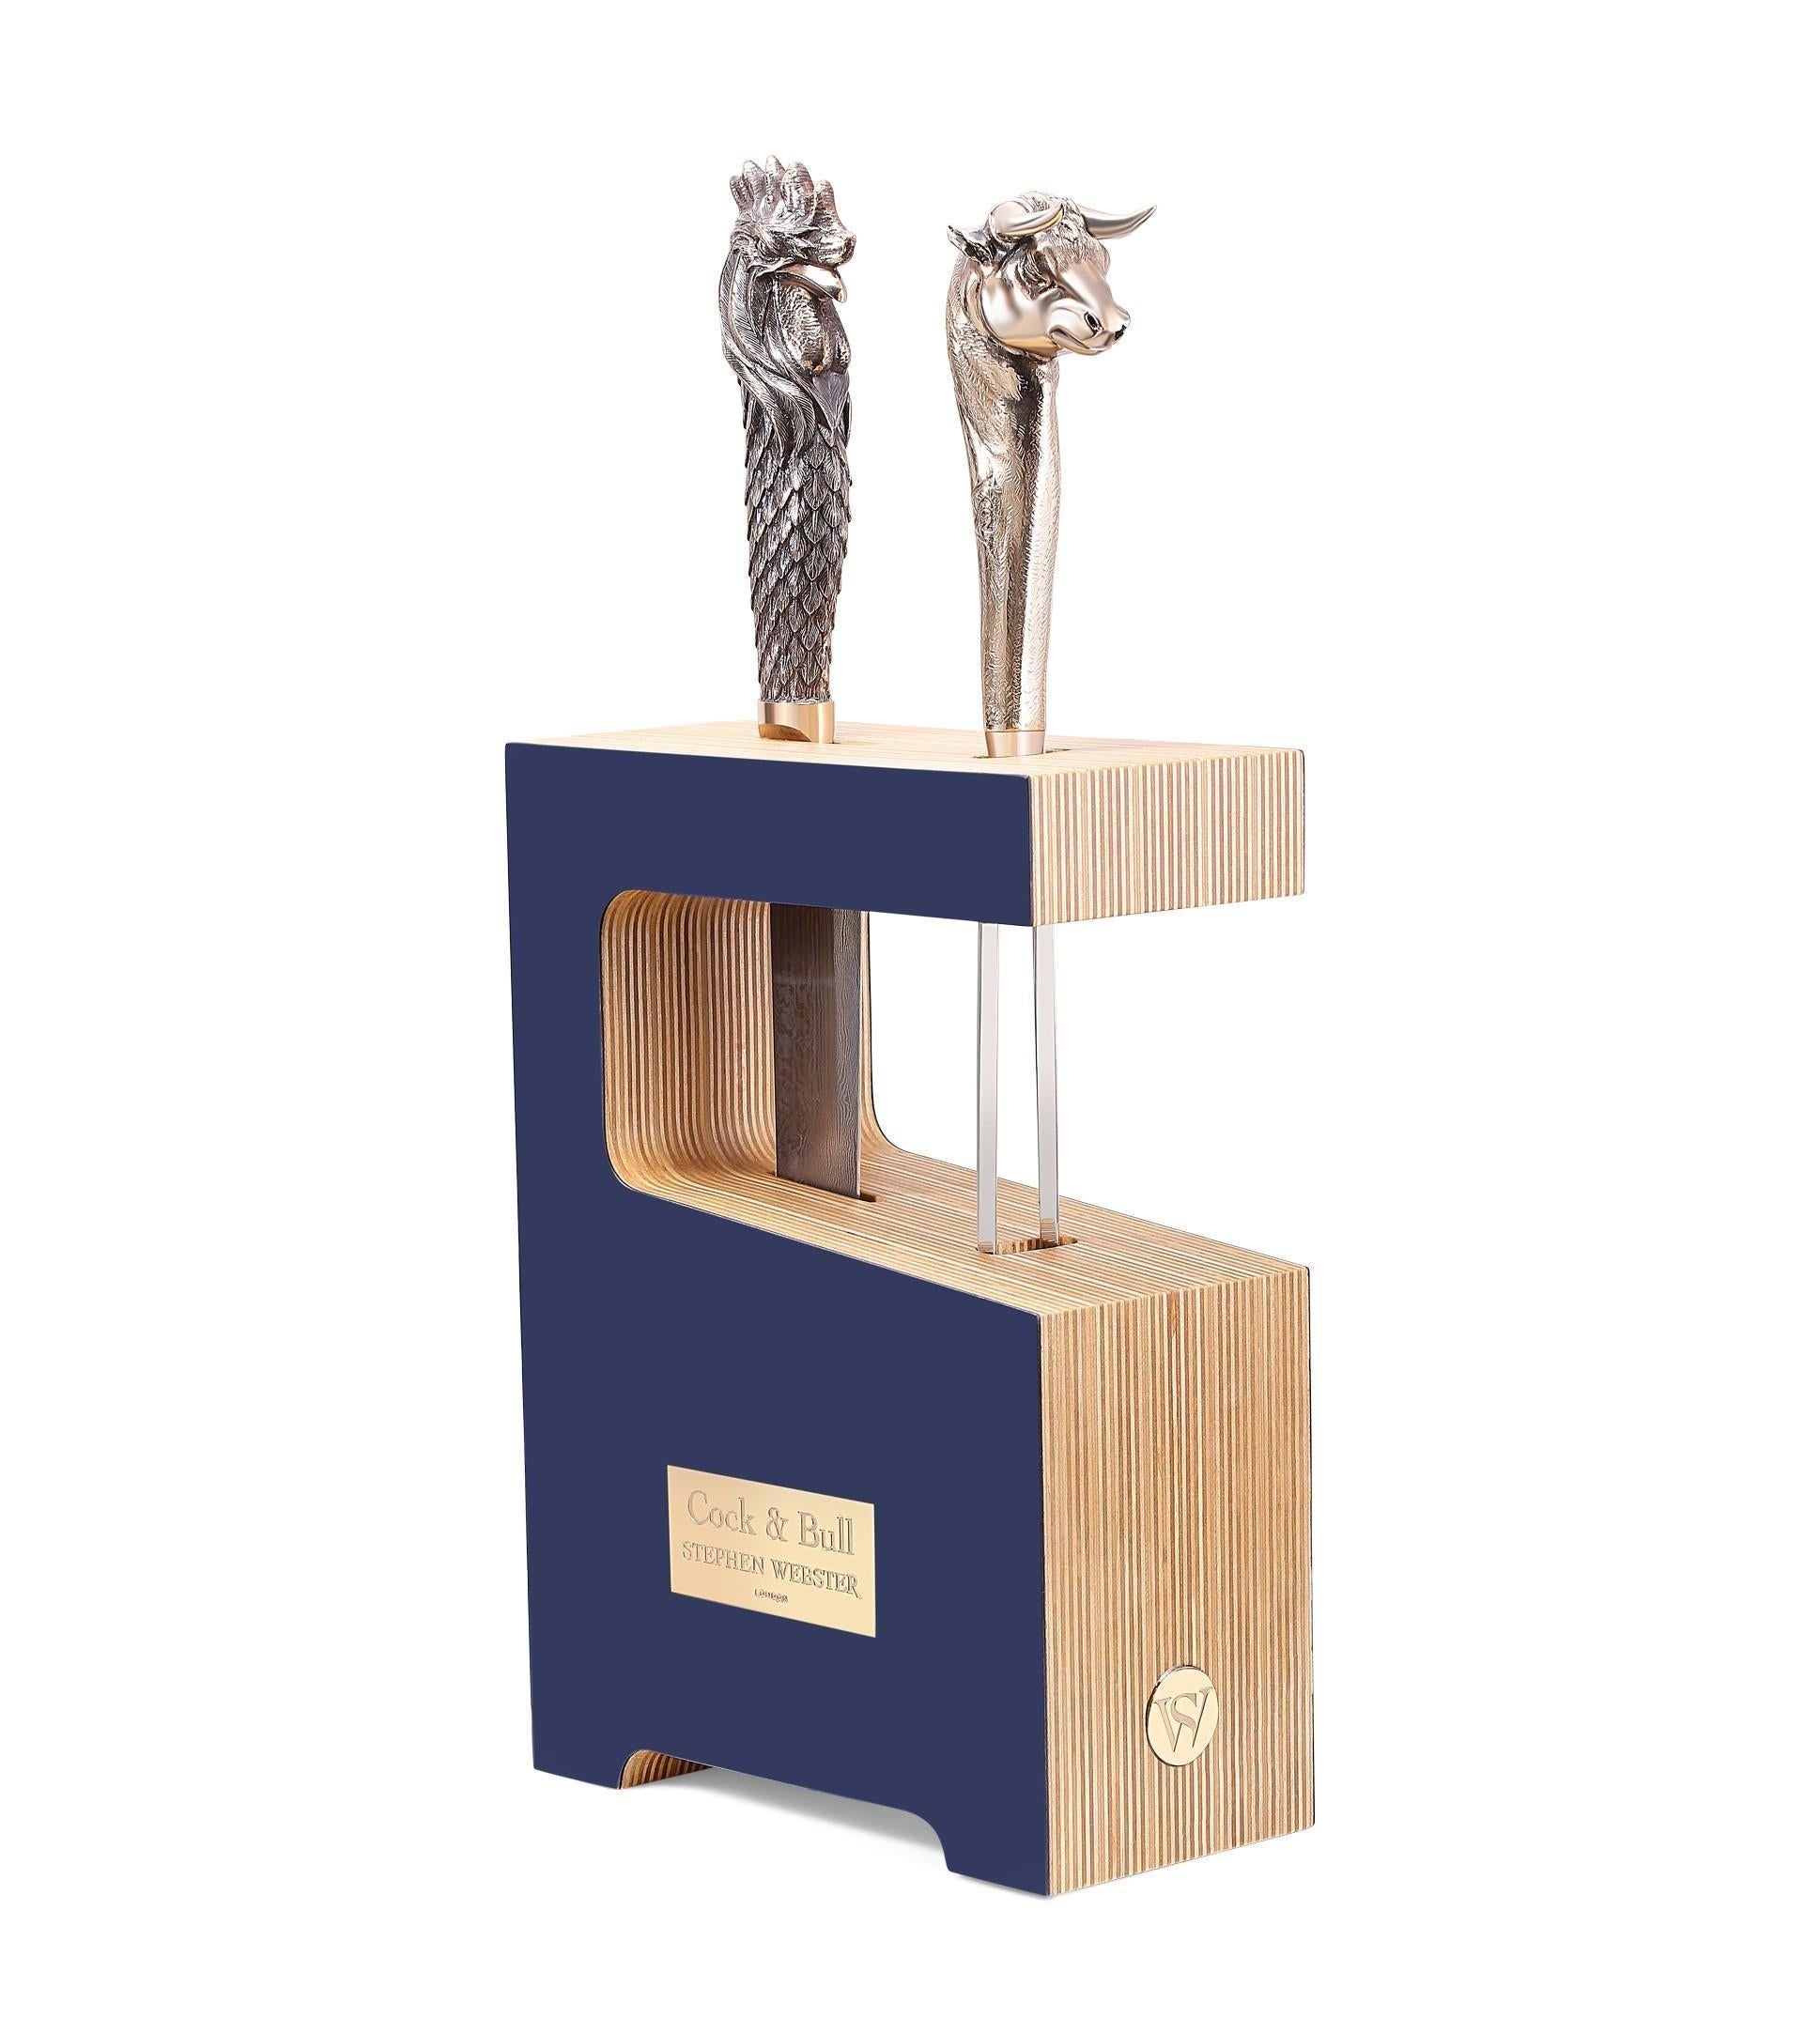 Cock and bull carving set and knife block (as seen in limited edition blue) - cock and bull carving set and knife block (as seen in limited edition blue) - featuring a cock head Damascus steel knife and bull head stainless steel fork.

Please